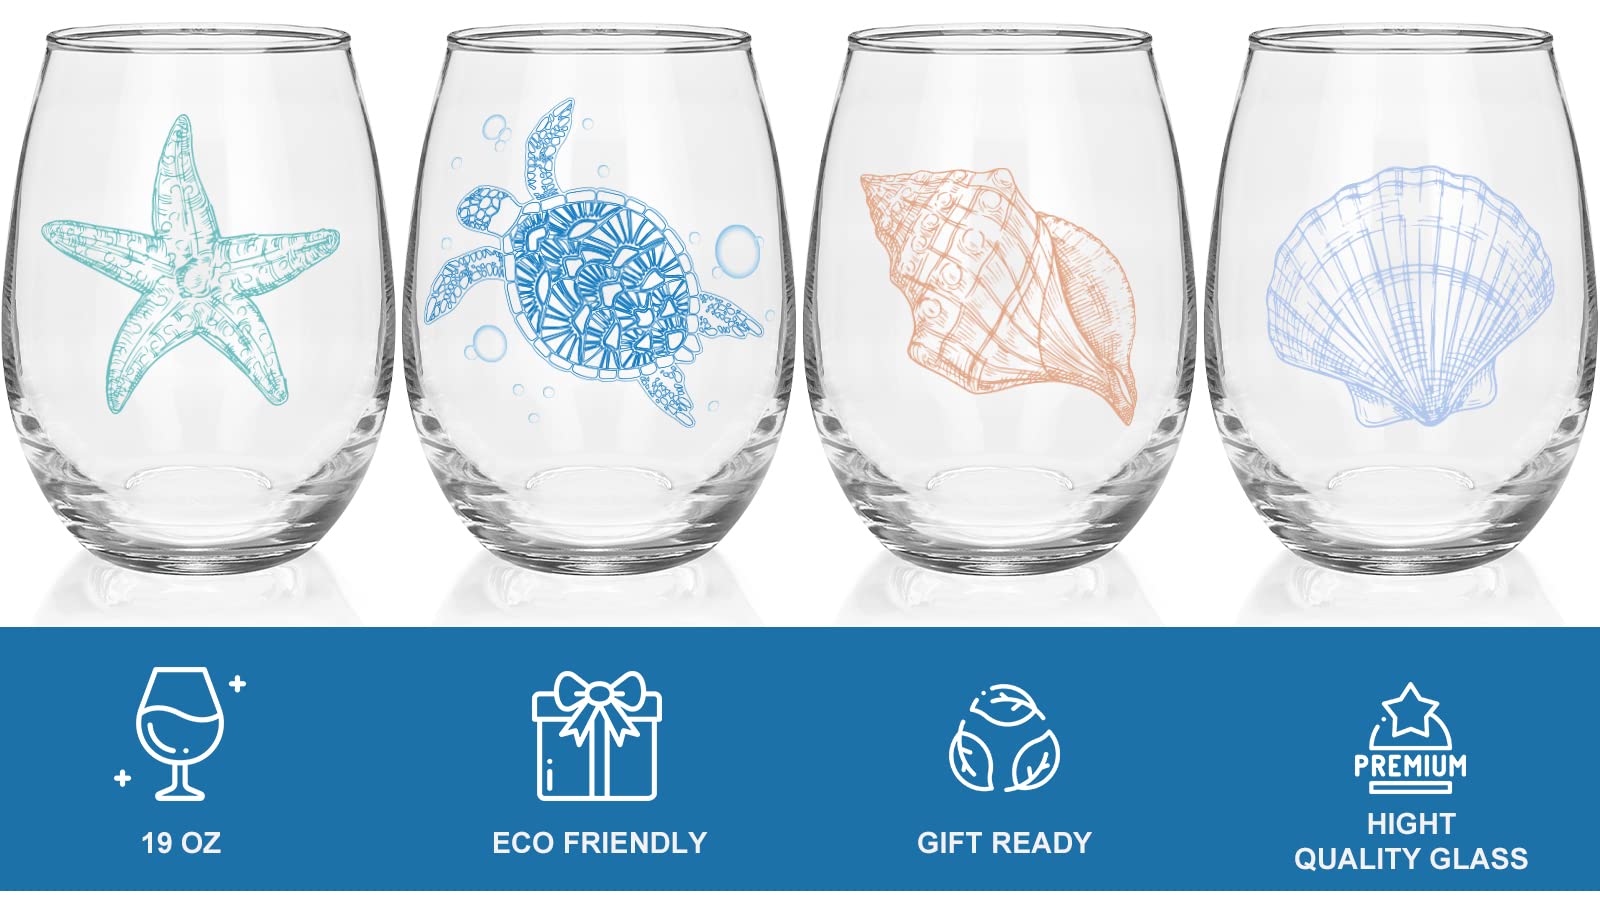 Ocean Themed Stemless Wine Glasses, Set of 4 Seashore Glassware - Sea Turtle, Starfish, Seashell, Conch Shell Assortment, Gifts for Coastal Beach Sea Lovers, Birthday Gifts for Women Best Friends Gift